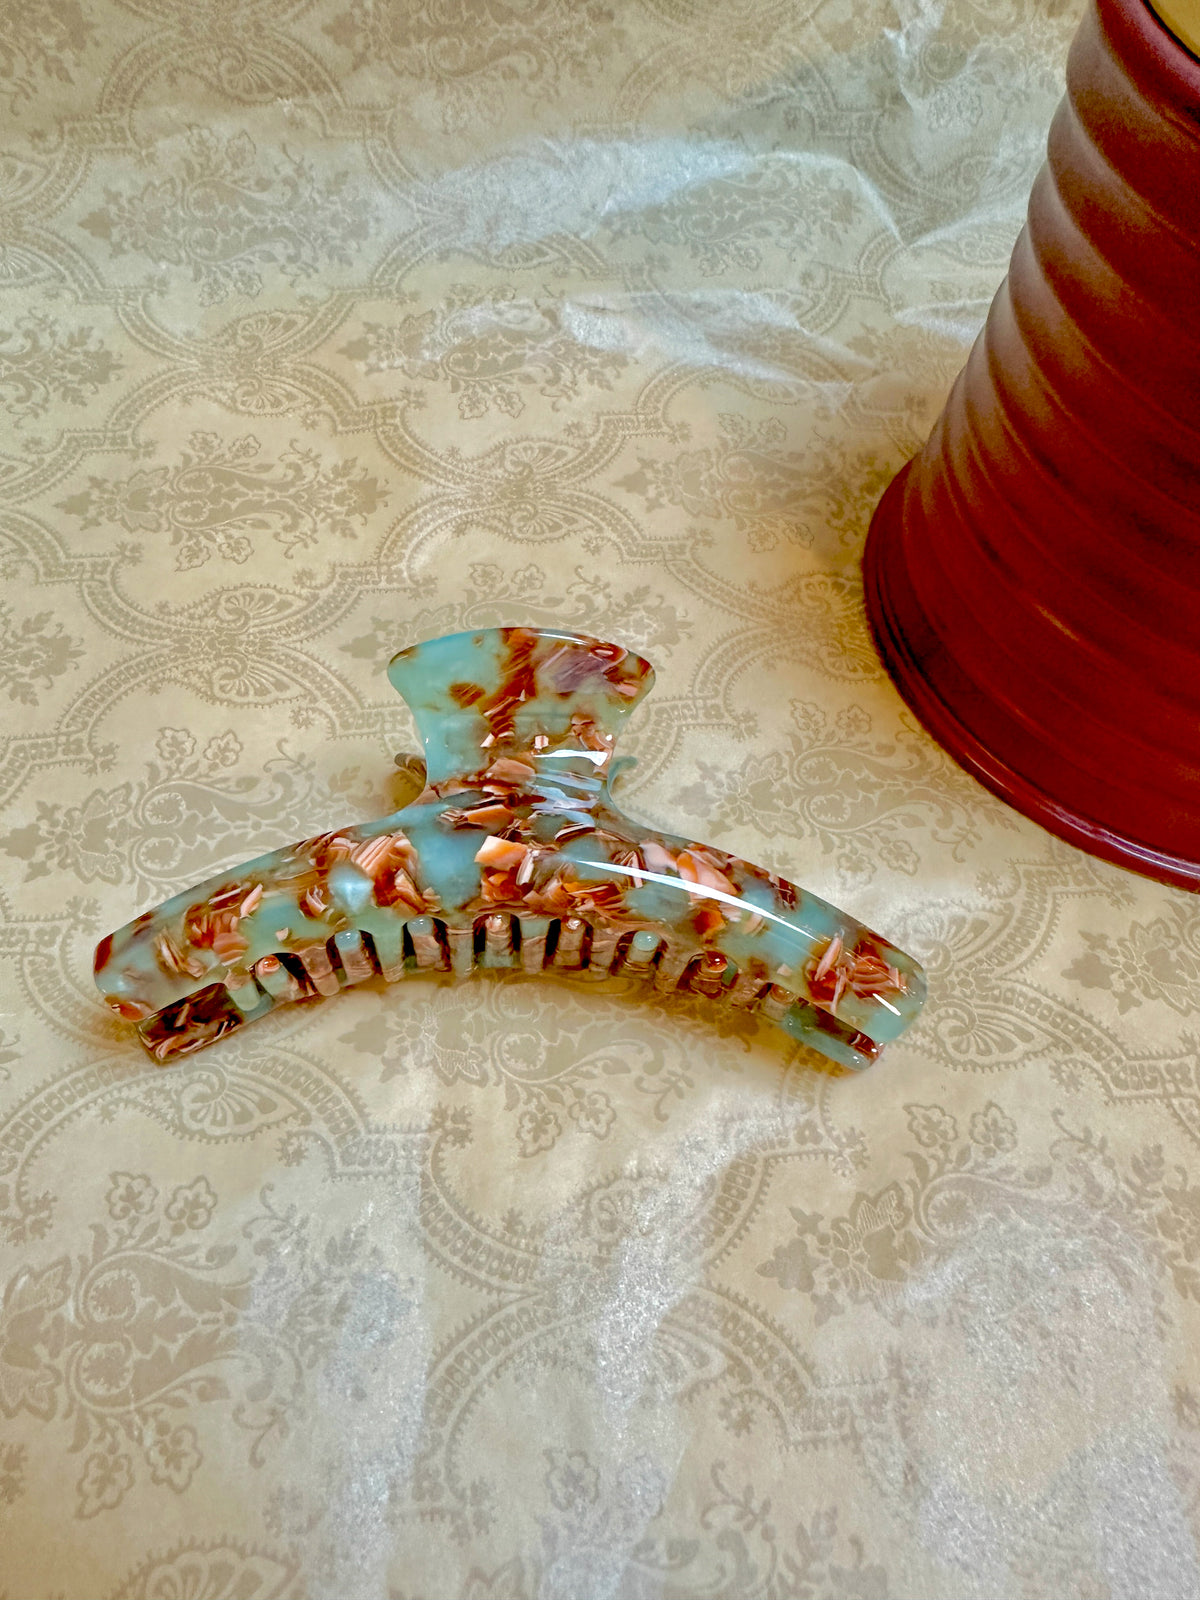 Vintage-Inspired Colorful Hair Clip